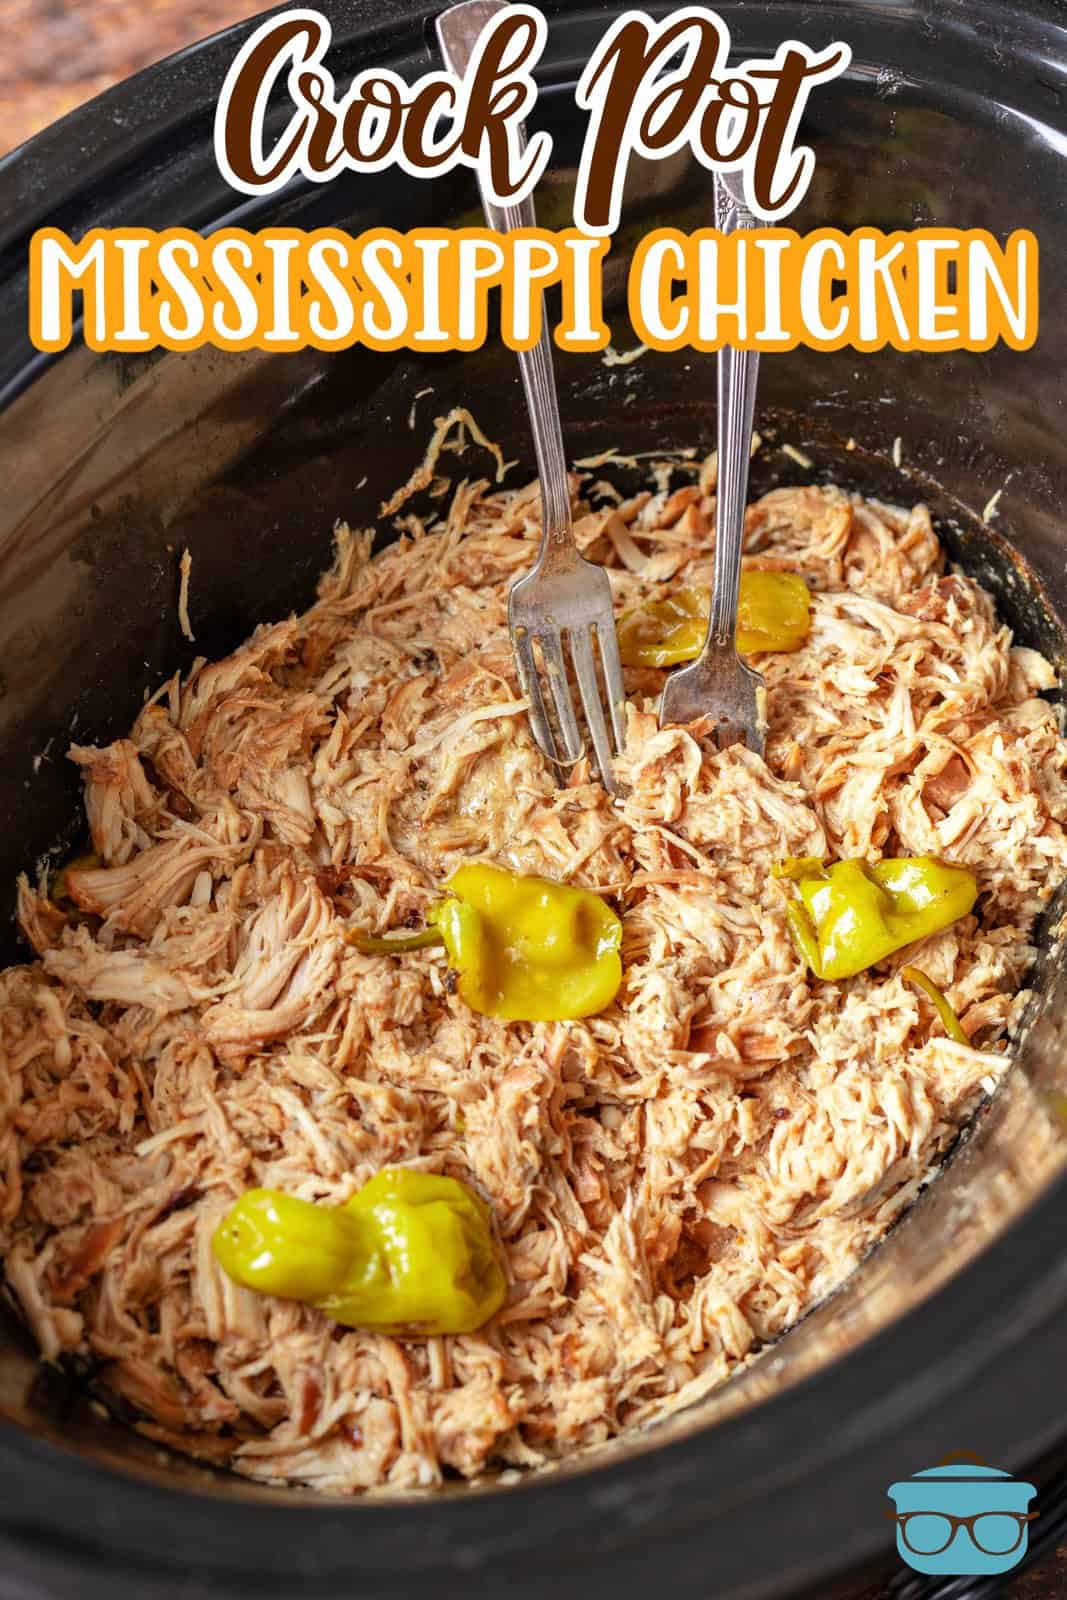 Crock Pot Mississippi Chicken shown shredded in a slow cooker with pepperoncini peppers.